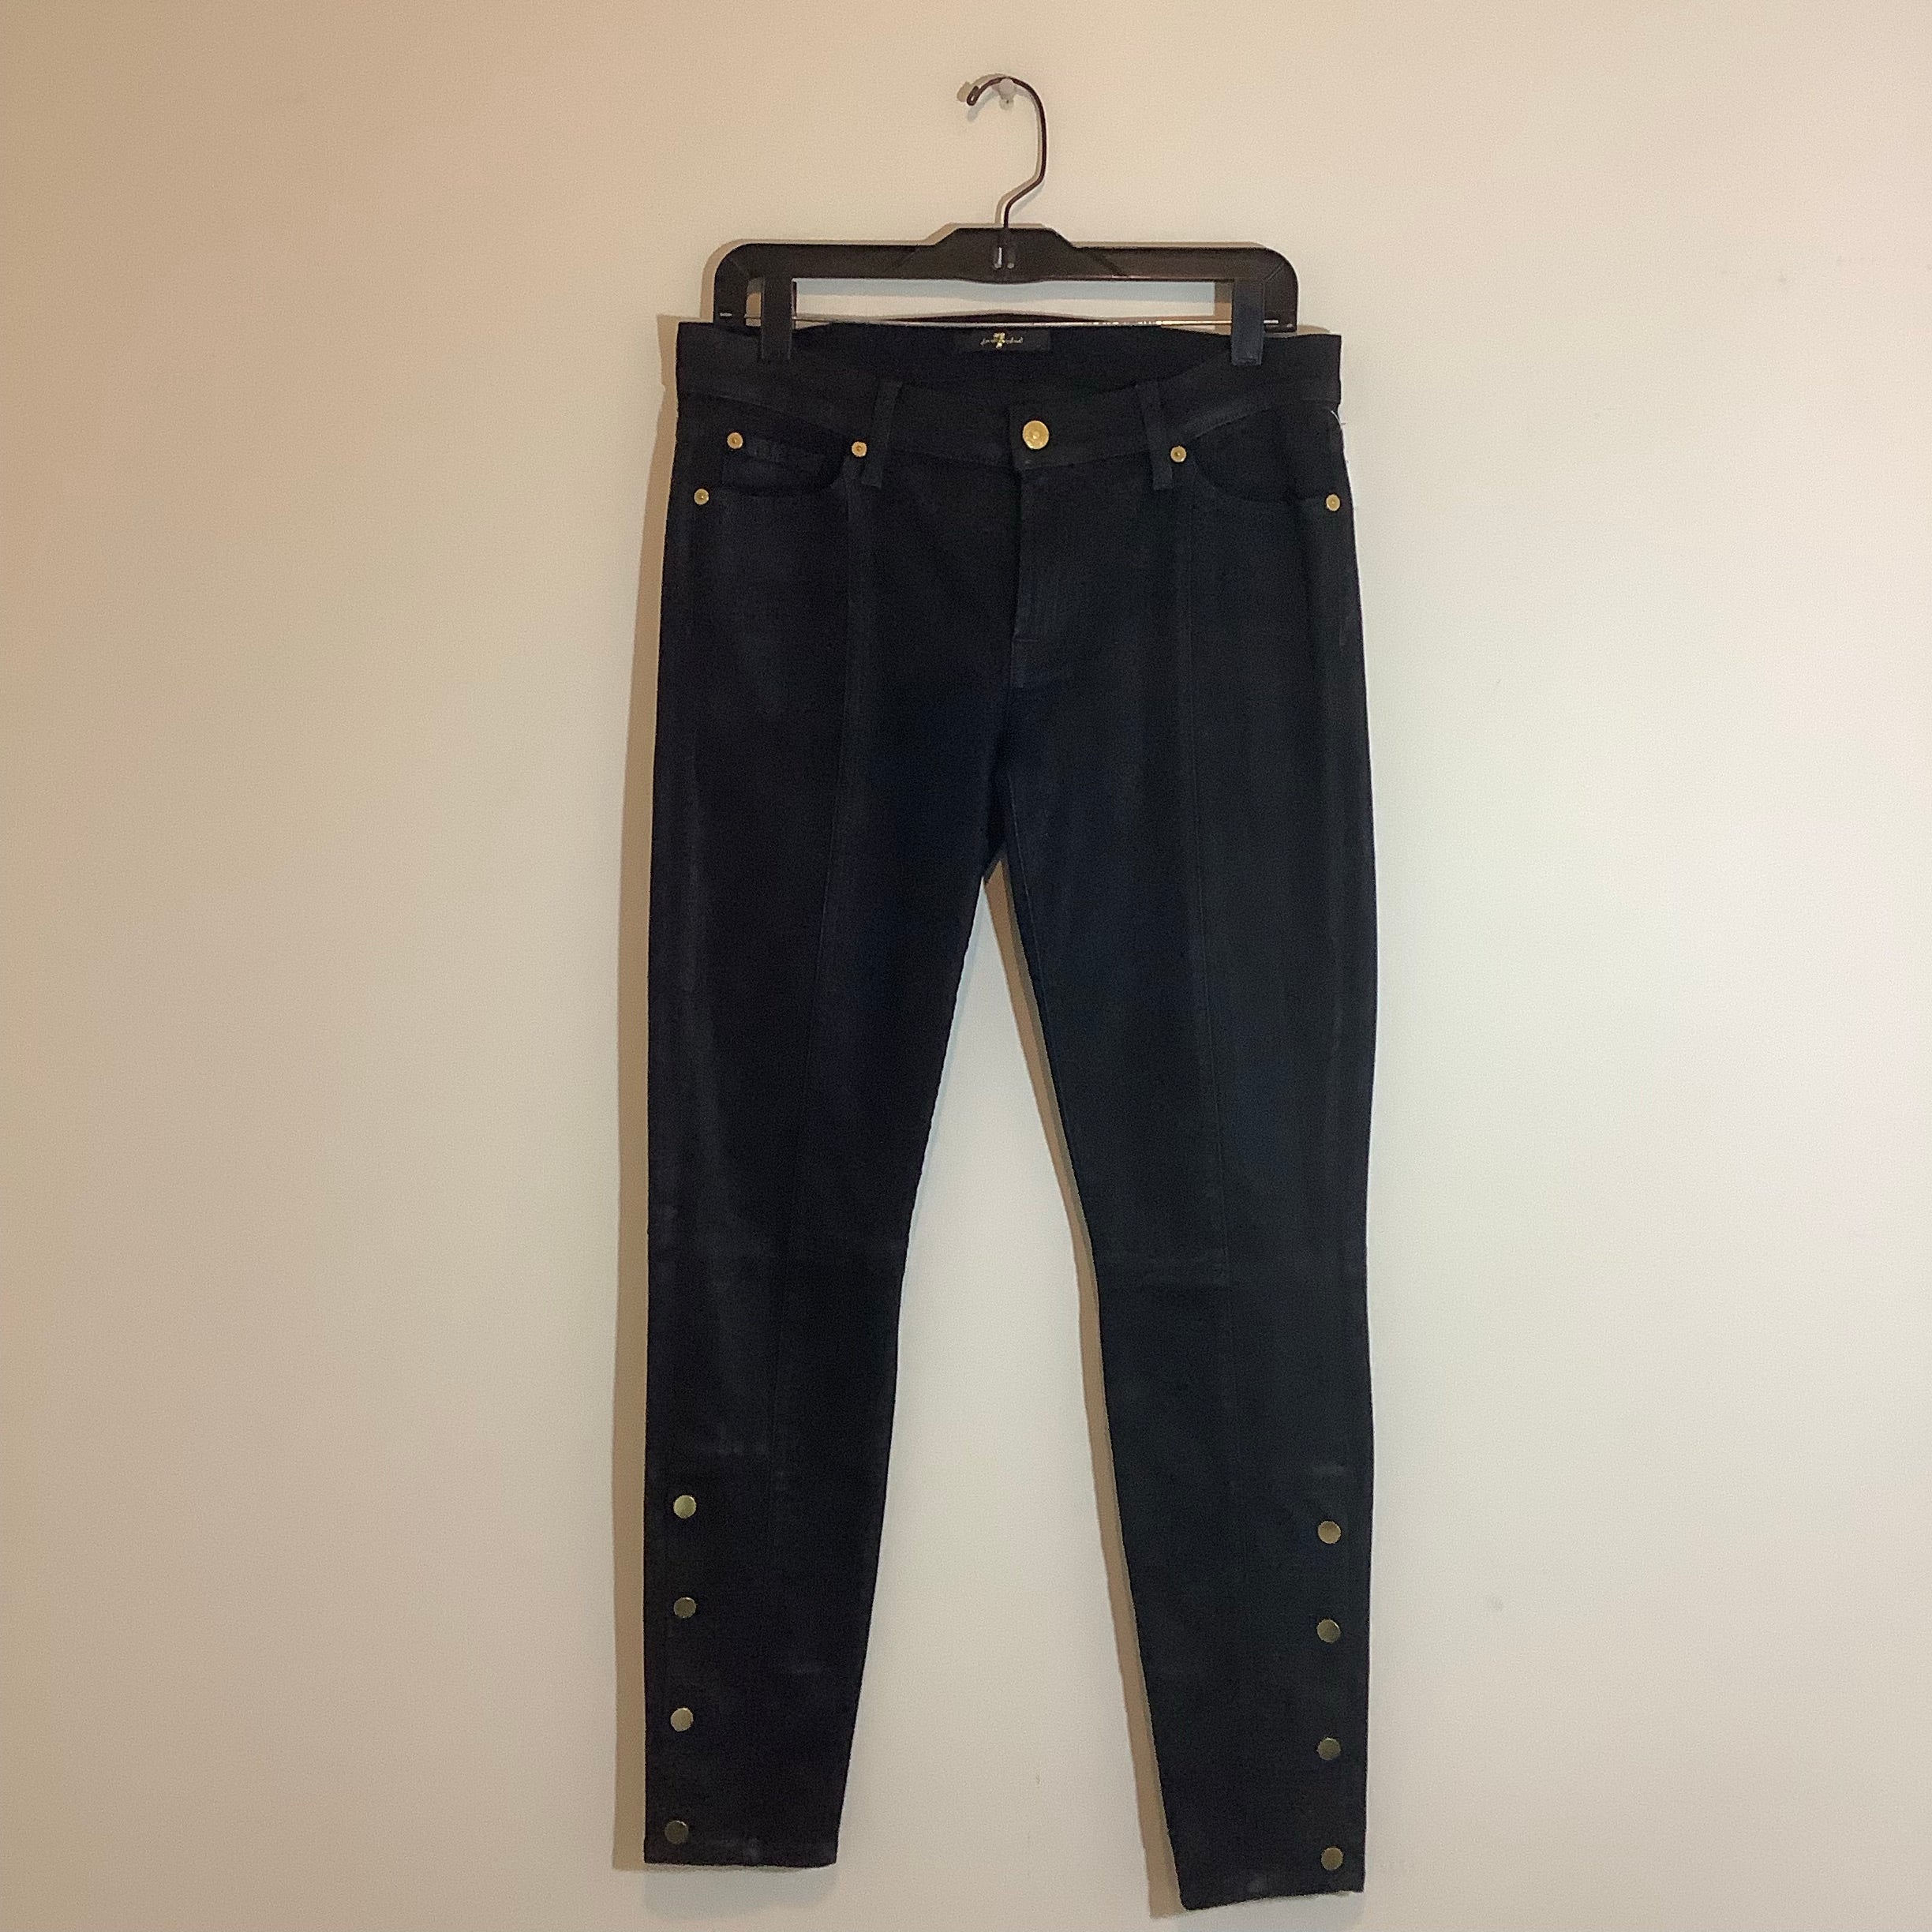 7 For All Mankind Black Jeans Size 31